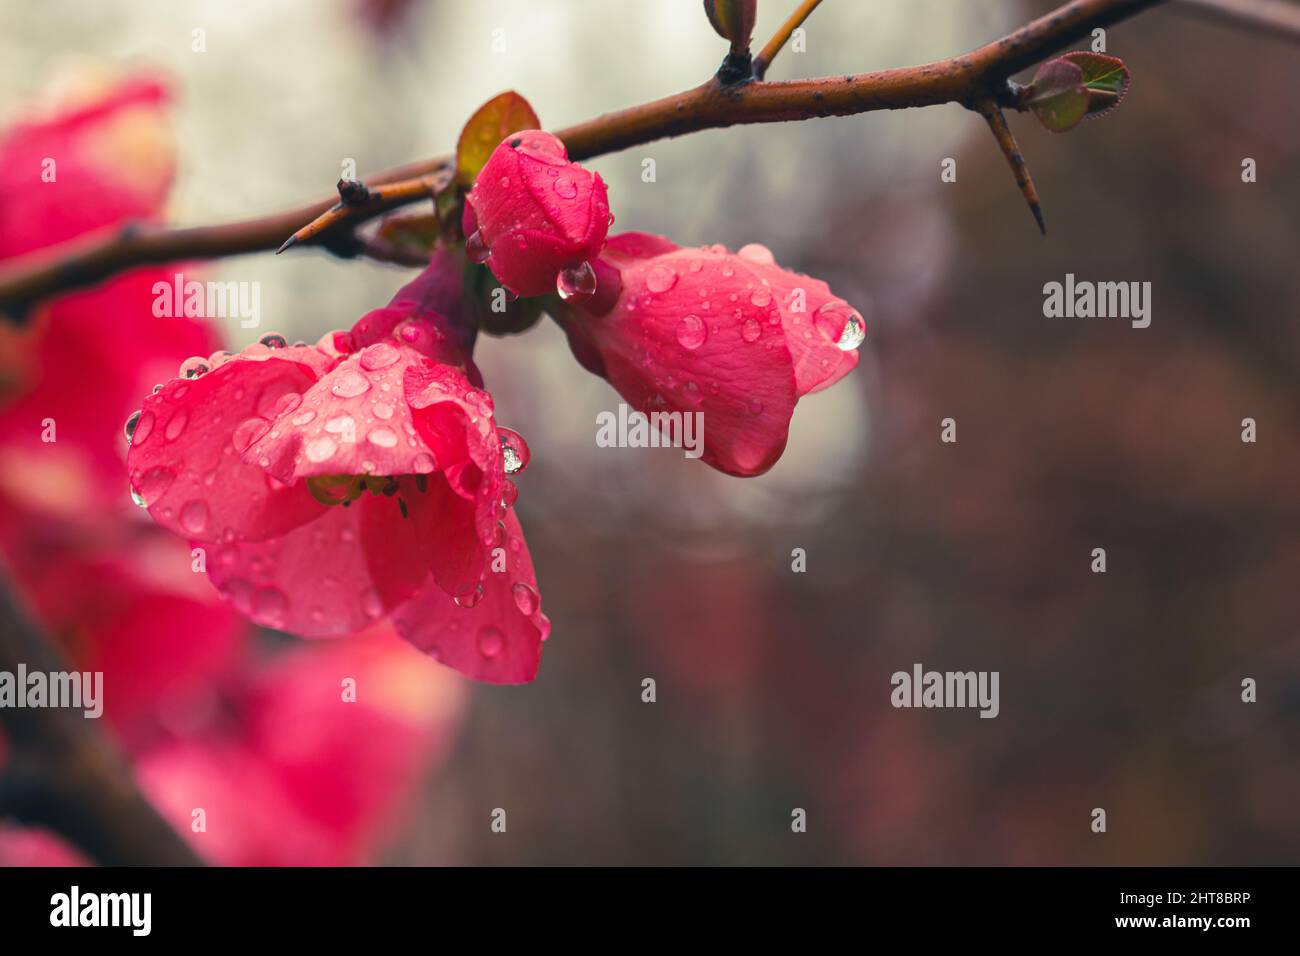 Detail of pretty red flowers of a Japanese quince (Chaenomeles japonica) covered in raindrops Stock Photo